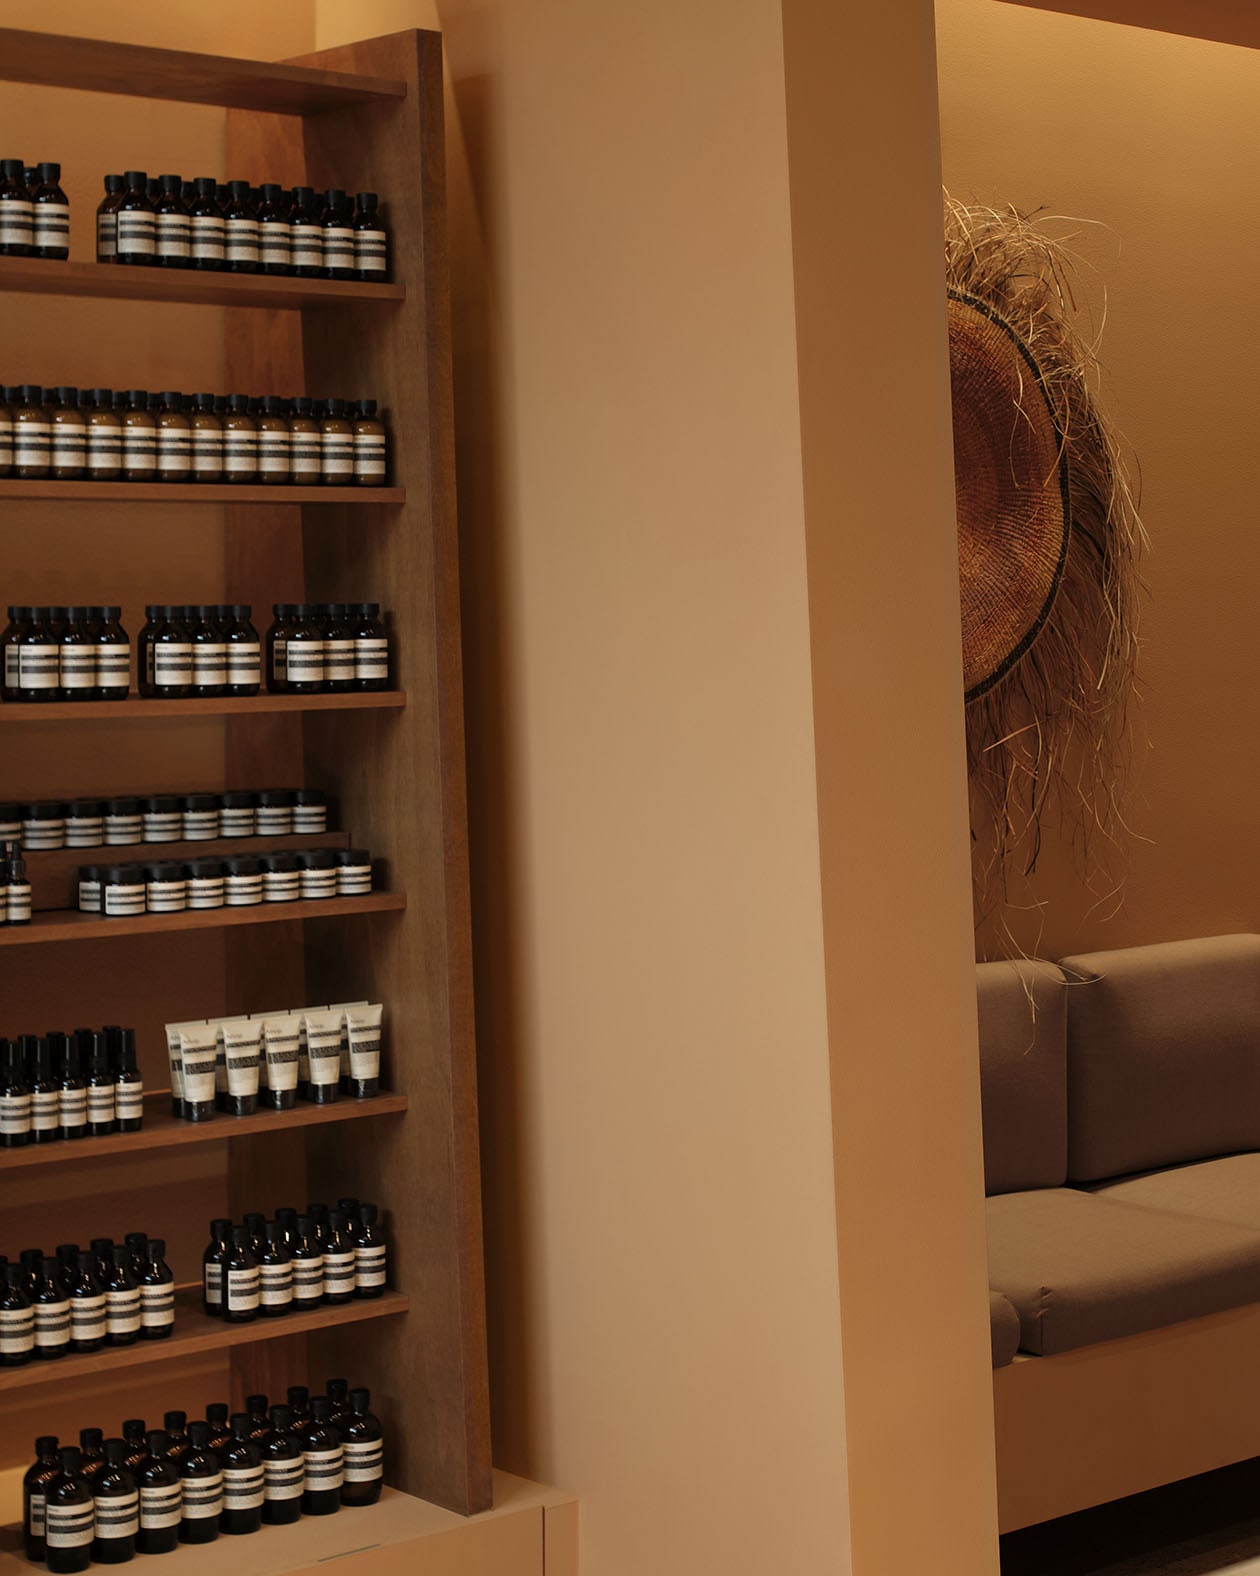 Aesop products displayed on wooden shelf in front of light brown walls